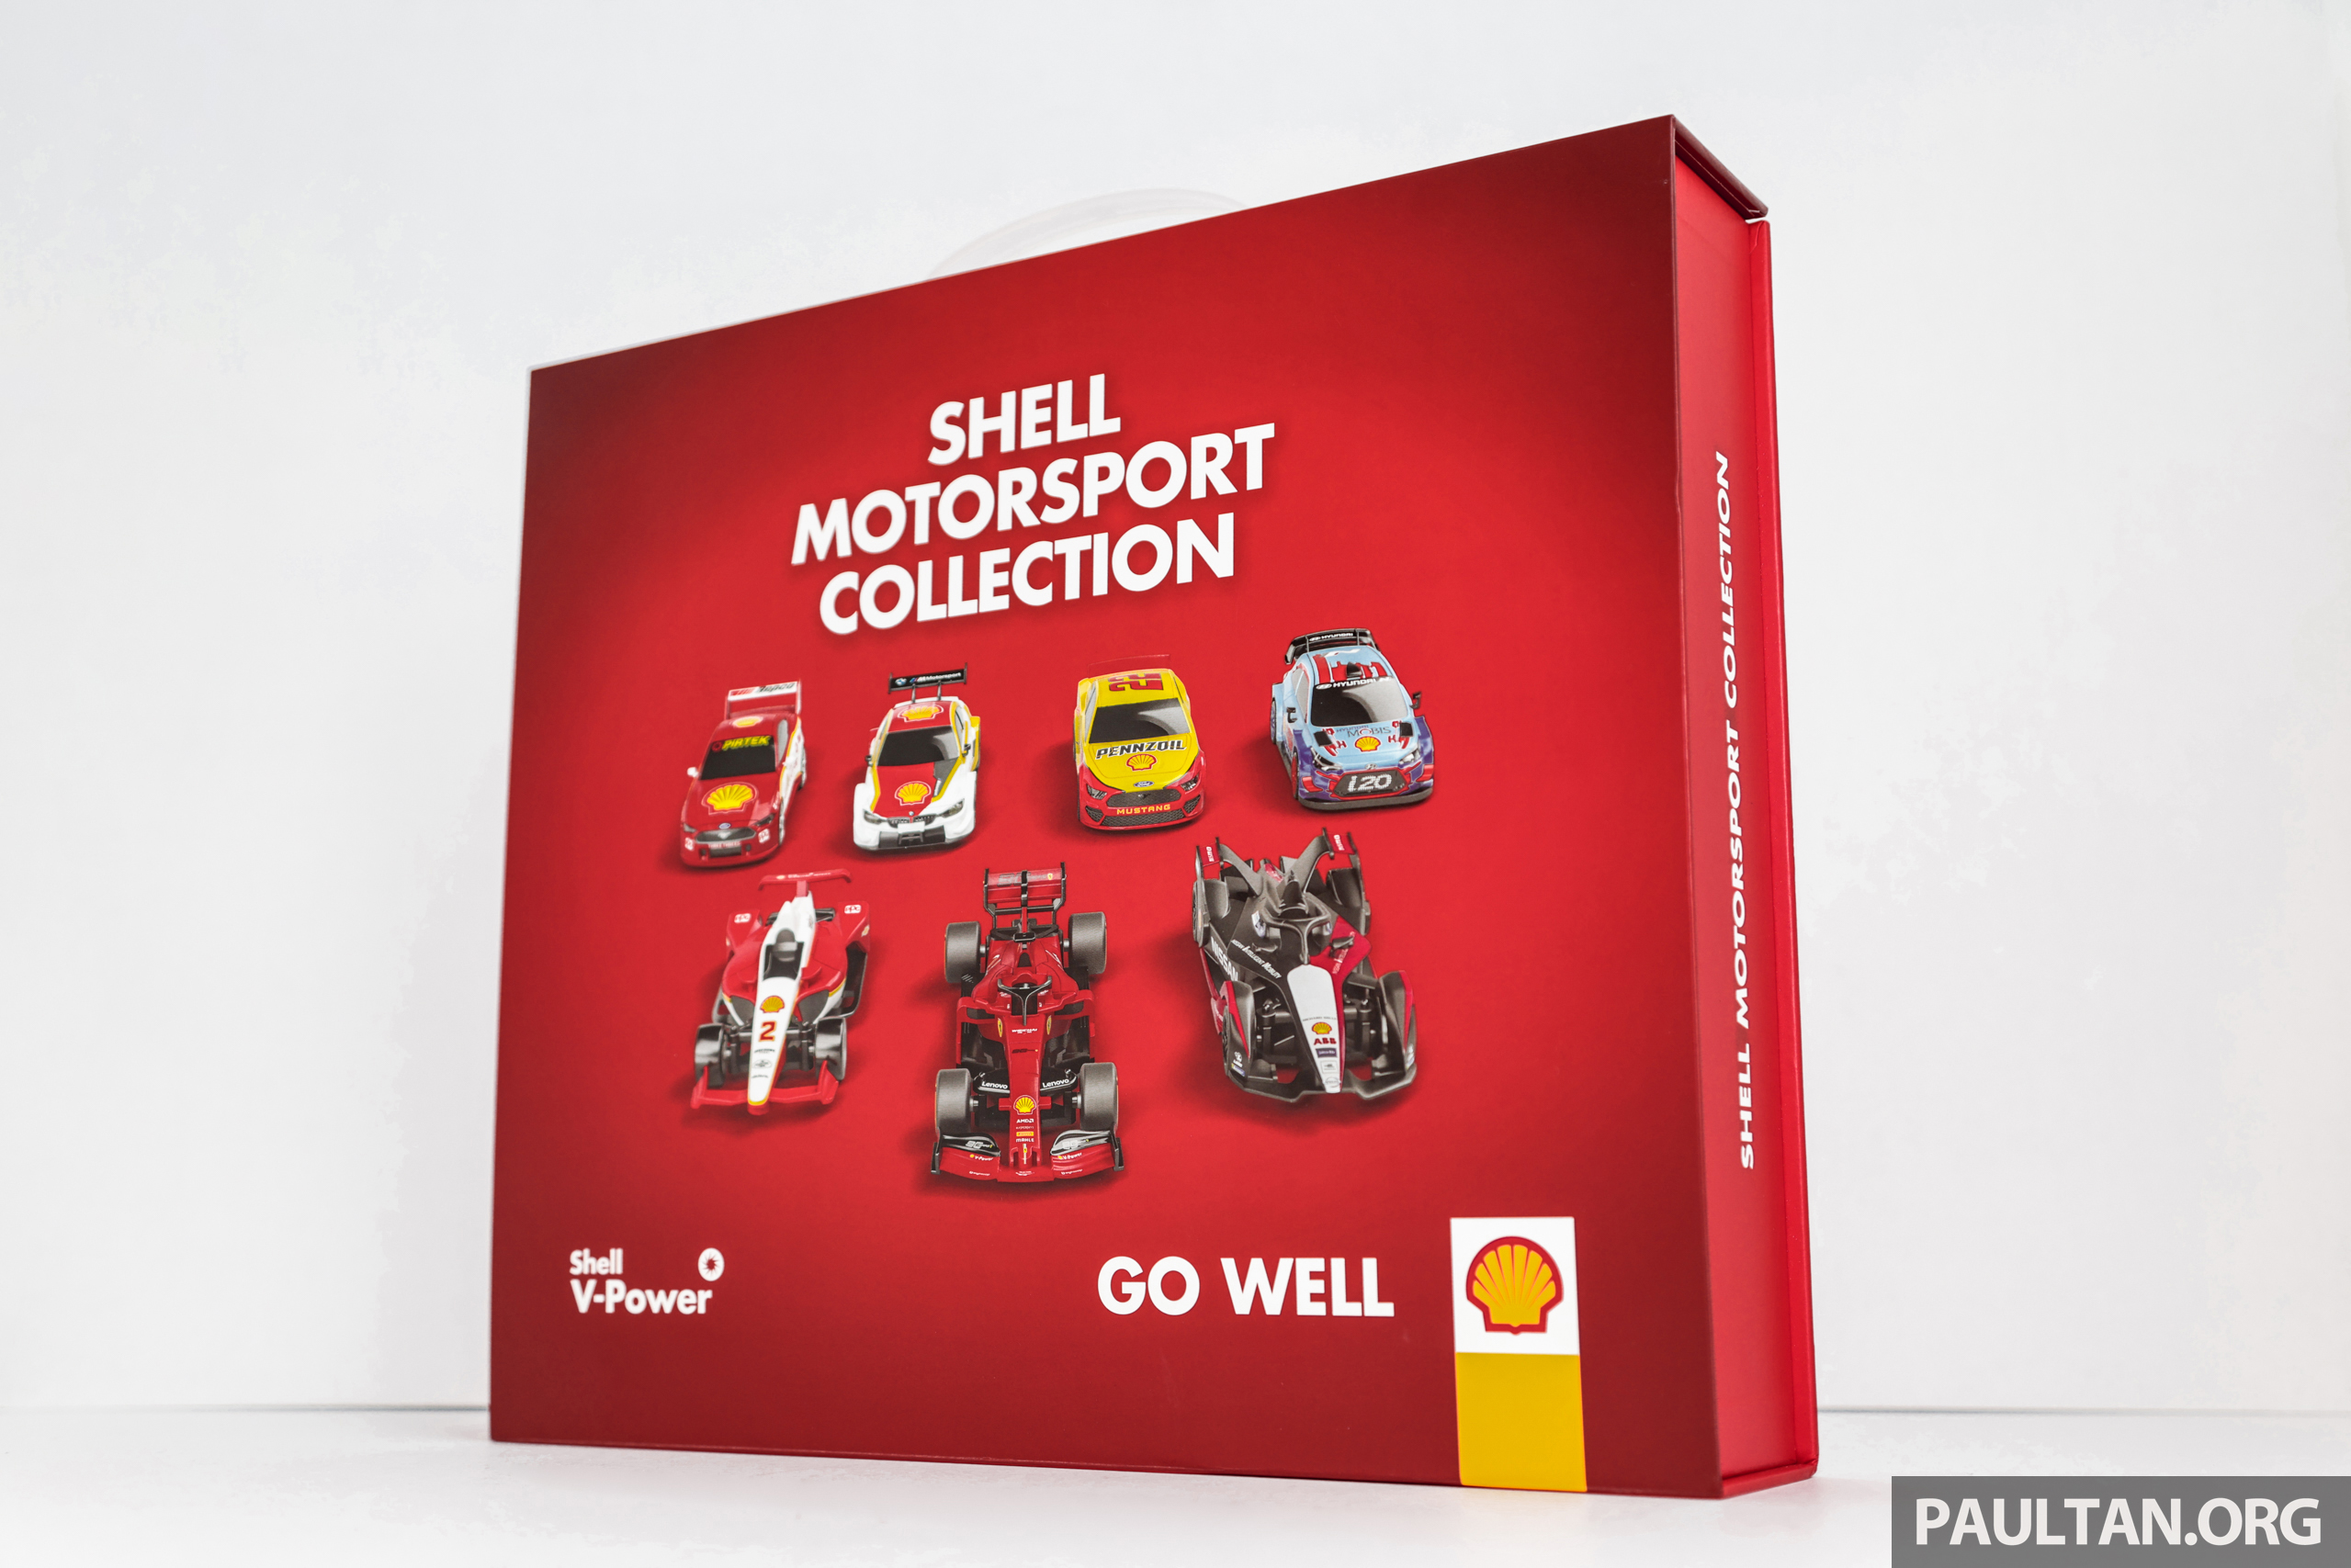 Shell_Motorsport_Collection_Malaysia-1